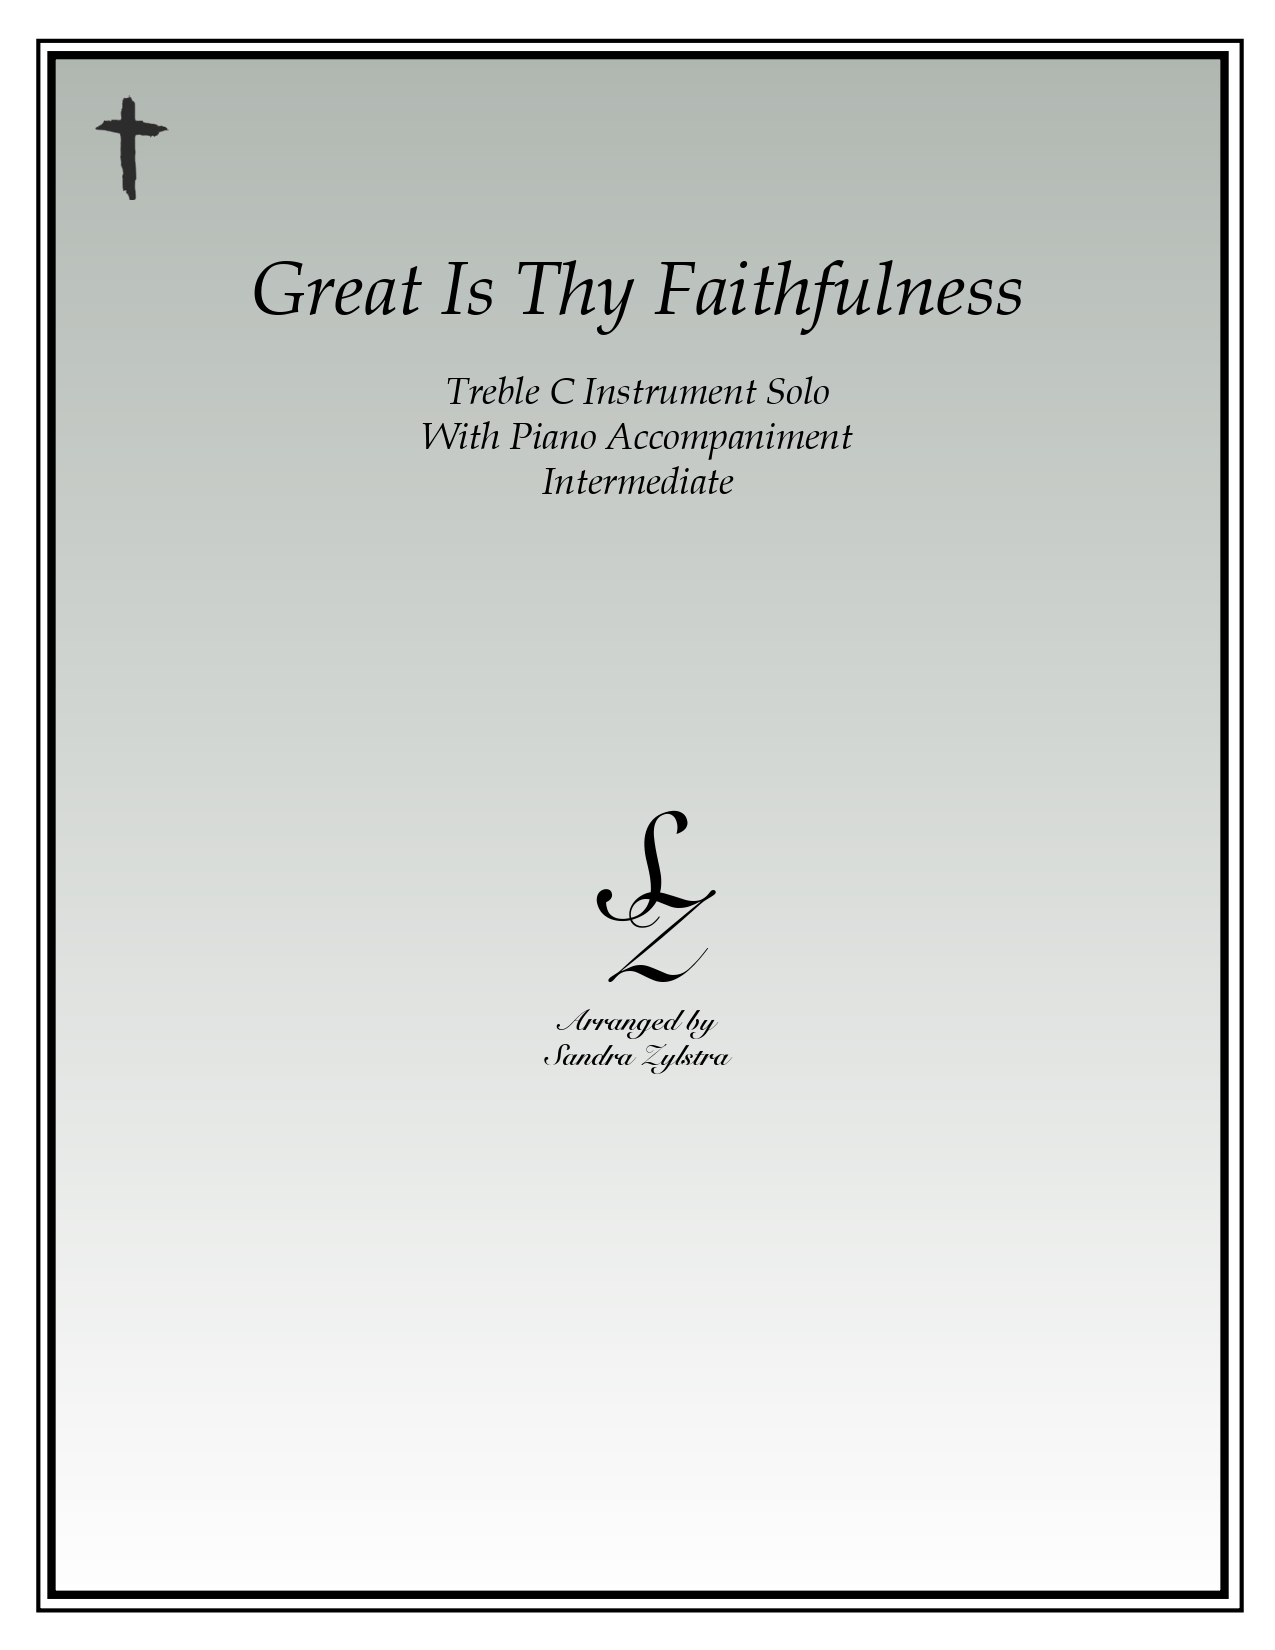 Great Is Thy Faithfulness treble C instrument solo part cover page 00011